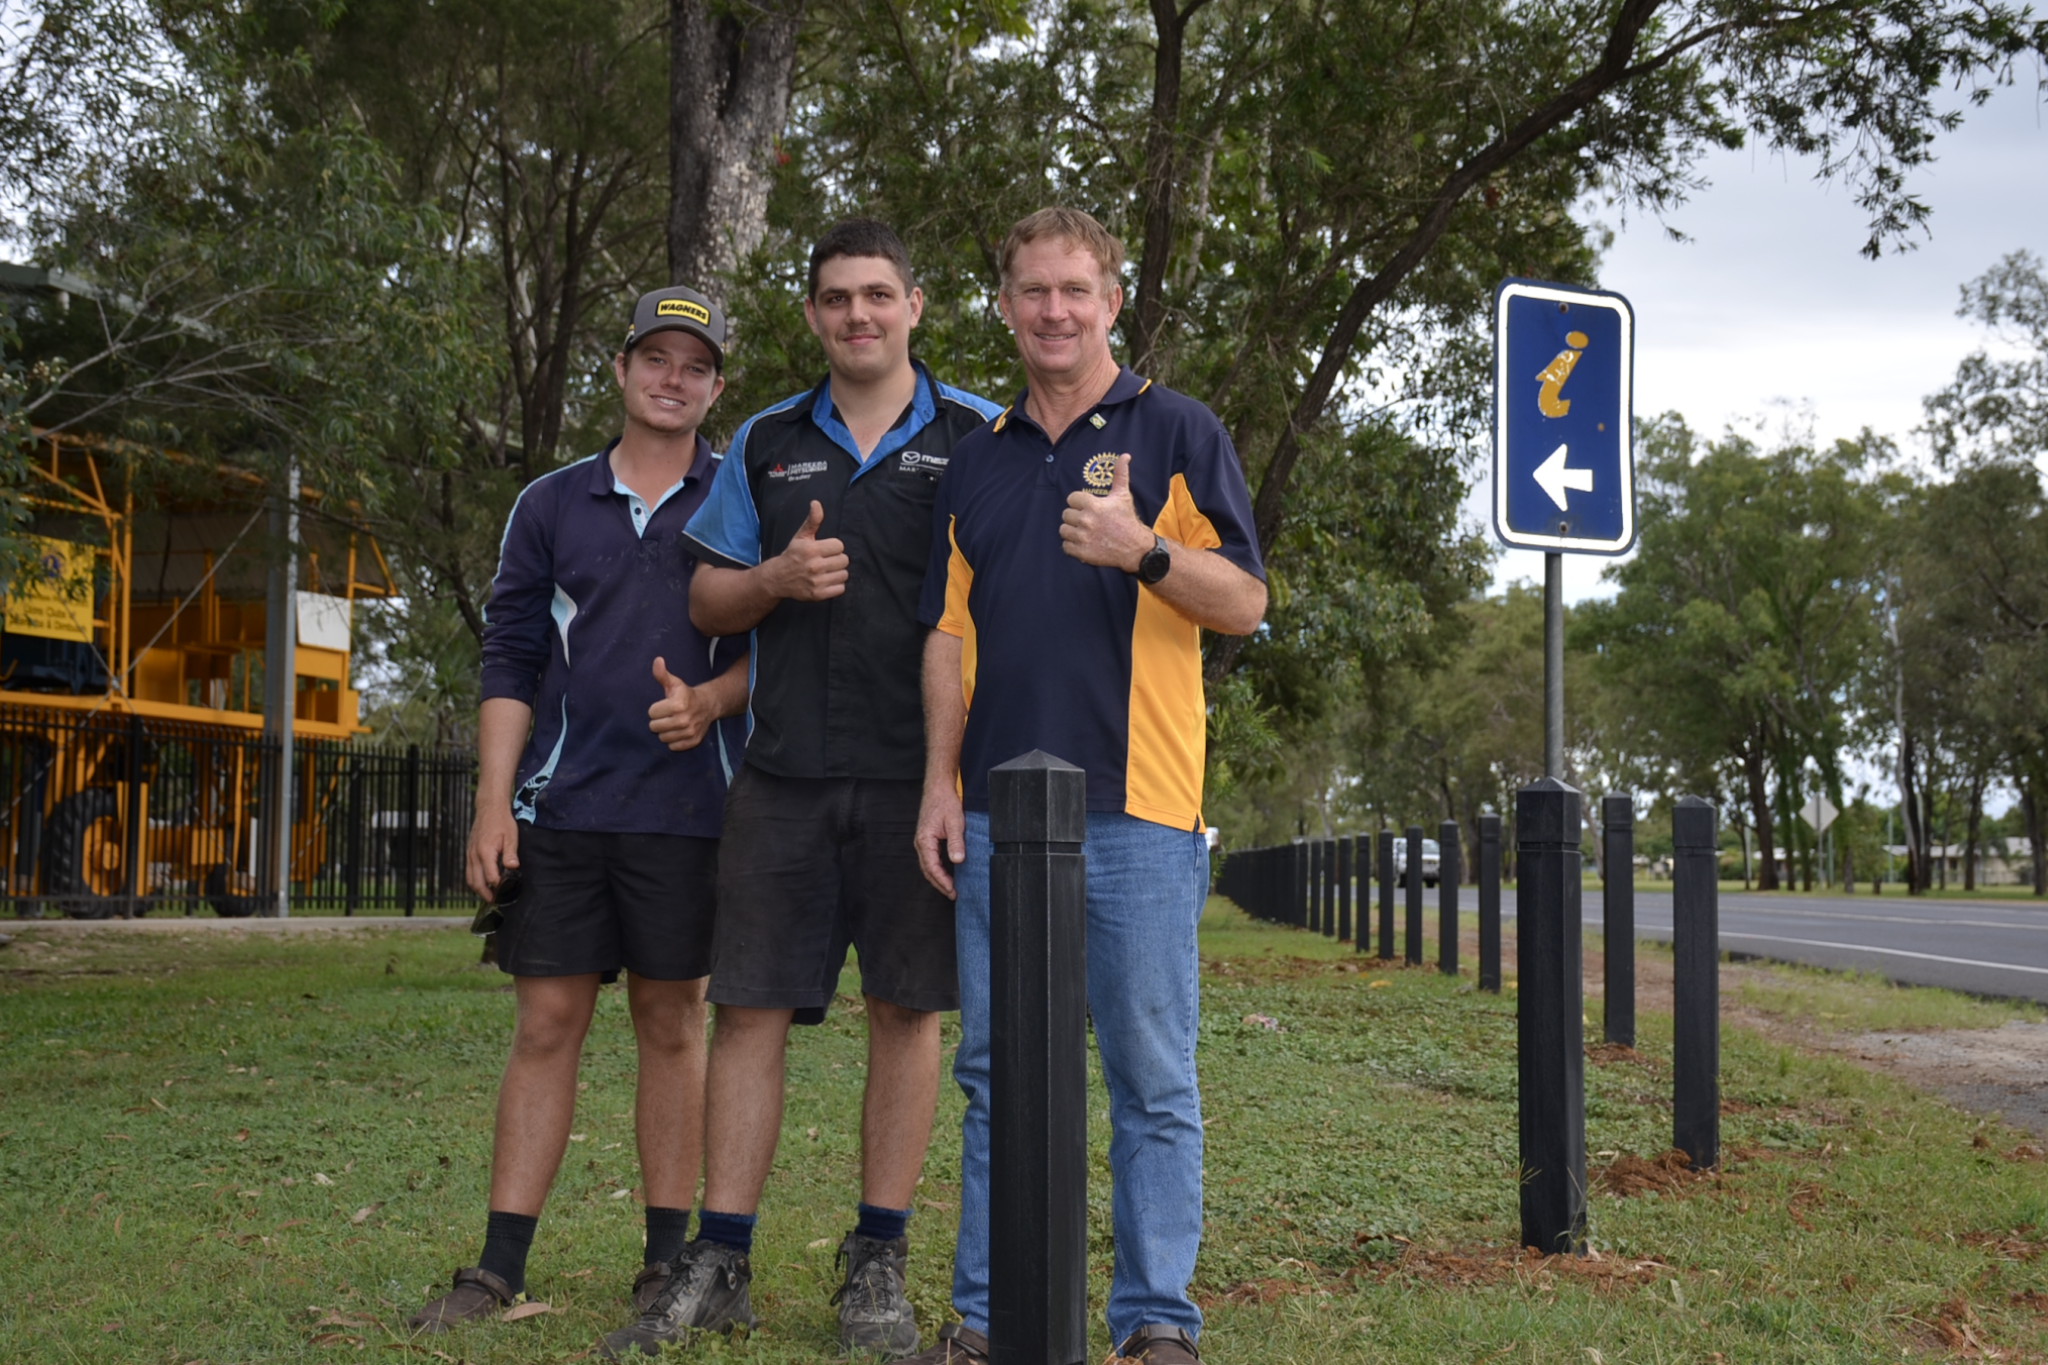 PICTURED: Rotarian Kevin Davies with sons Liam and Bradley in front of new recycled bollards installed at Ant Hill Park in front of the Mareeba Heritage Centre.